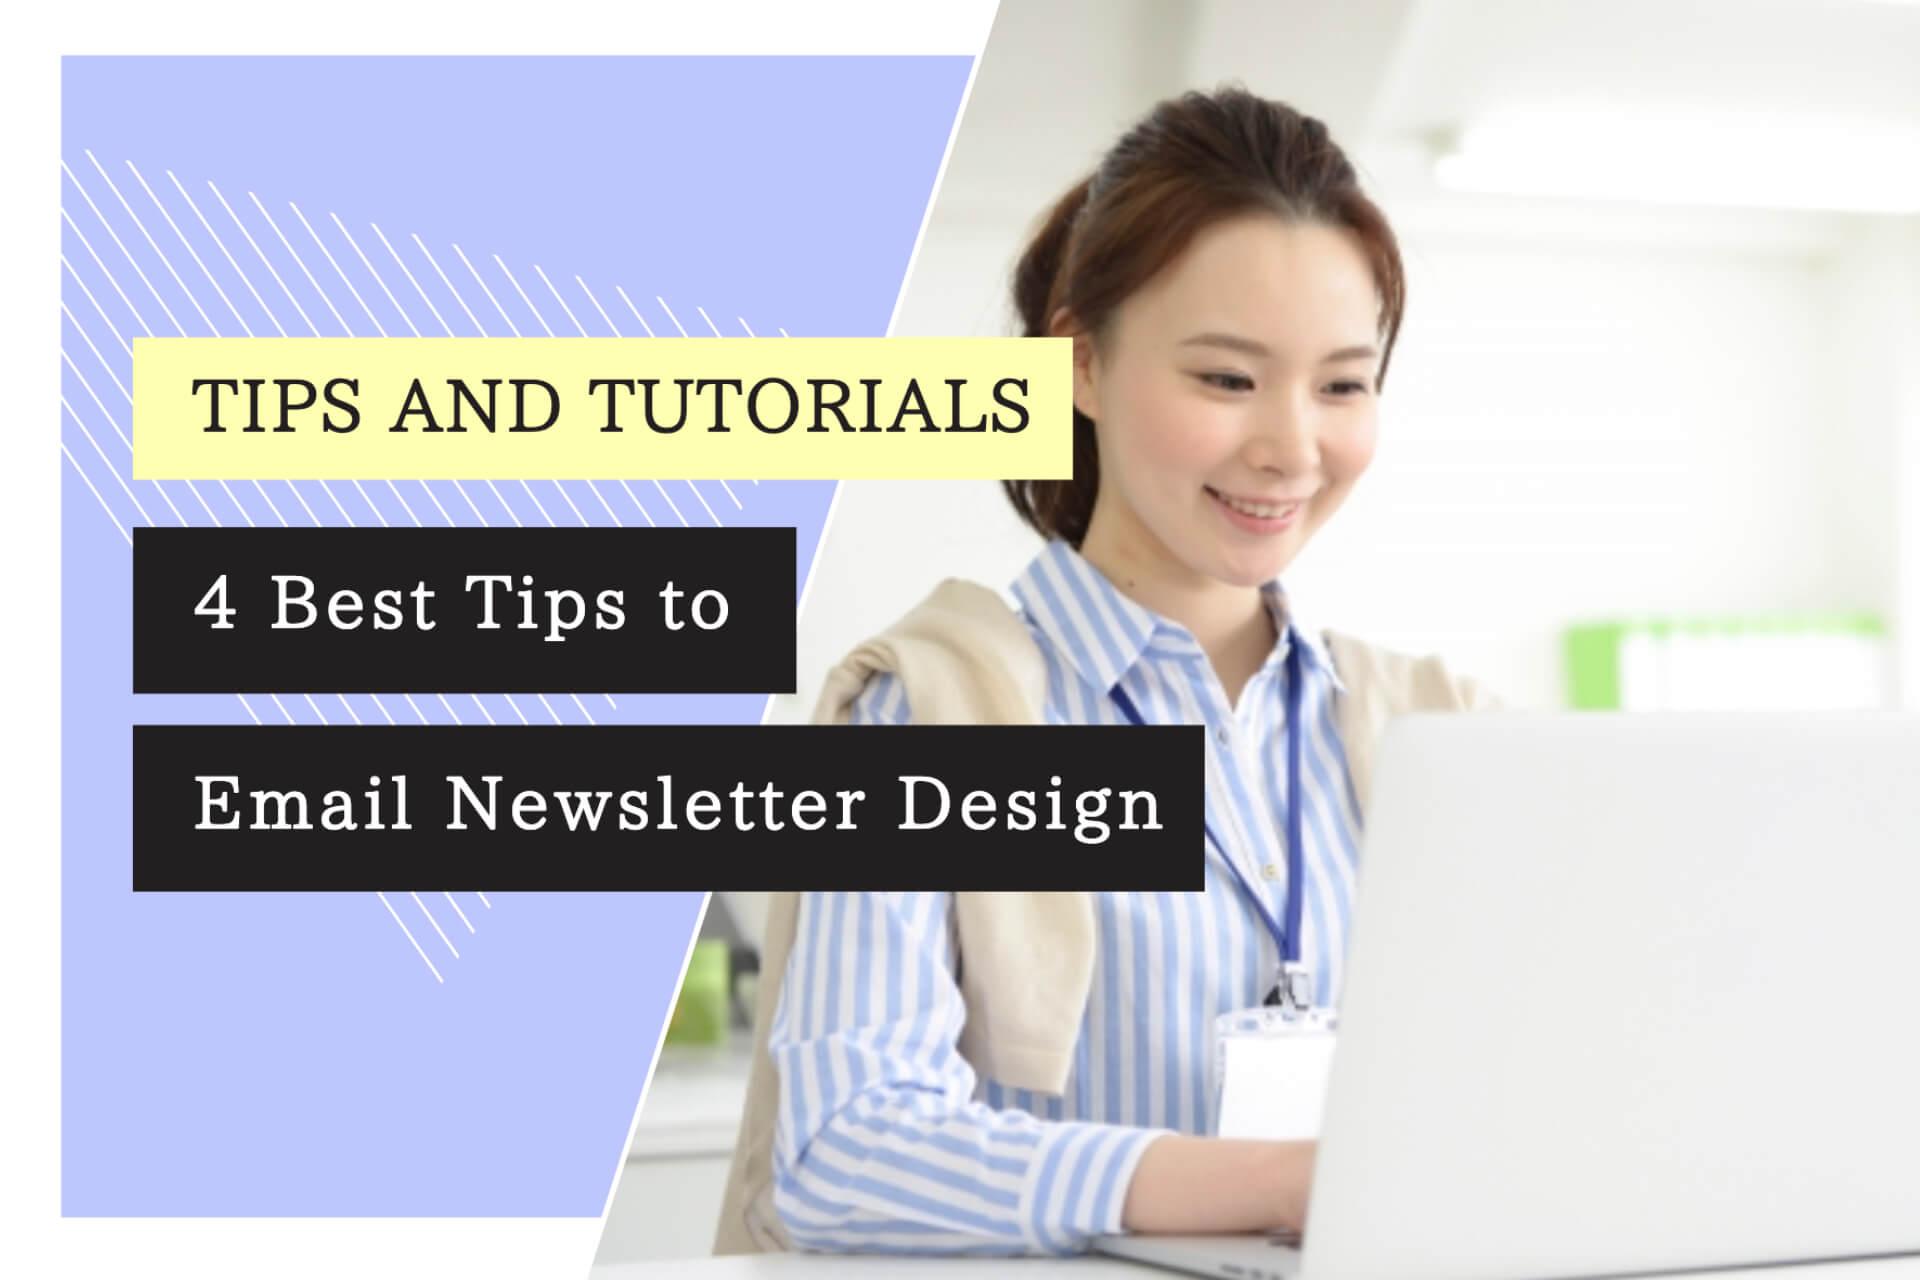 4 Best Tips to Email Newsletter Design